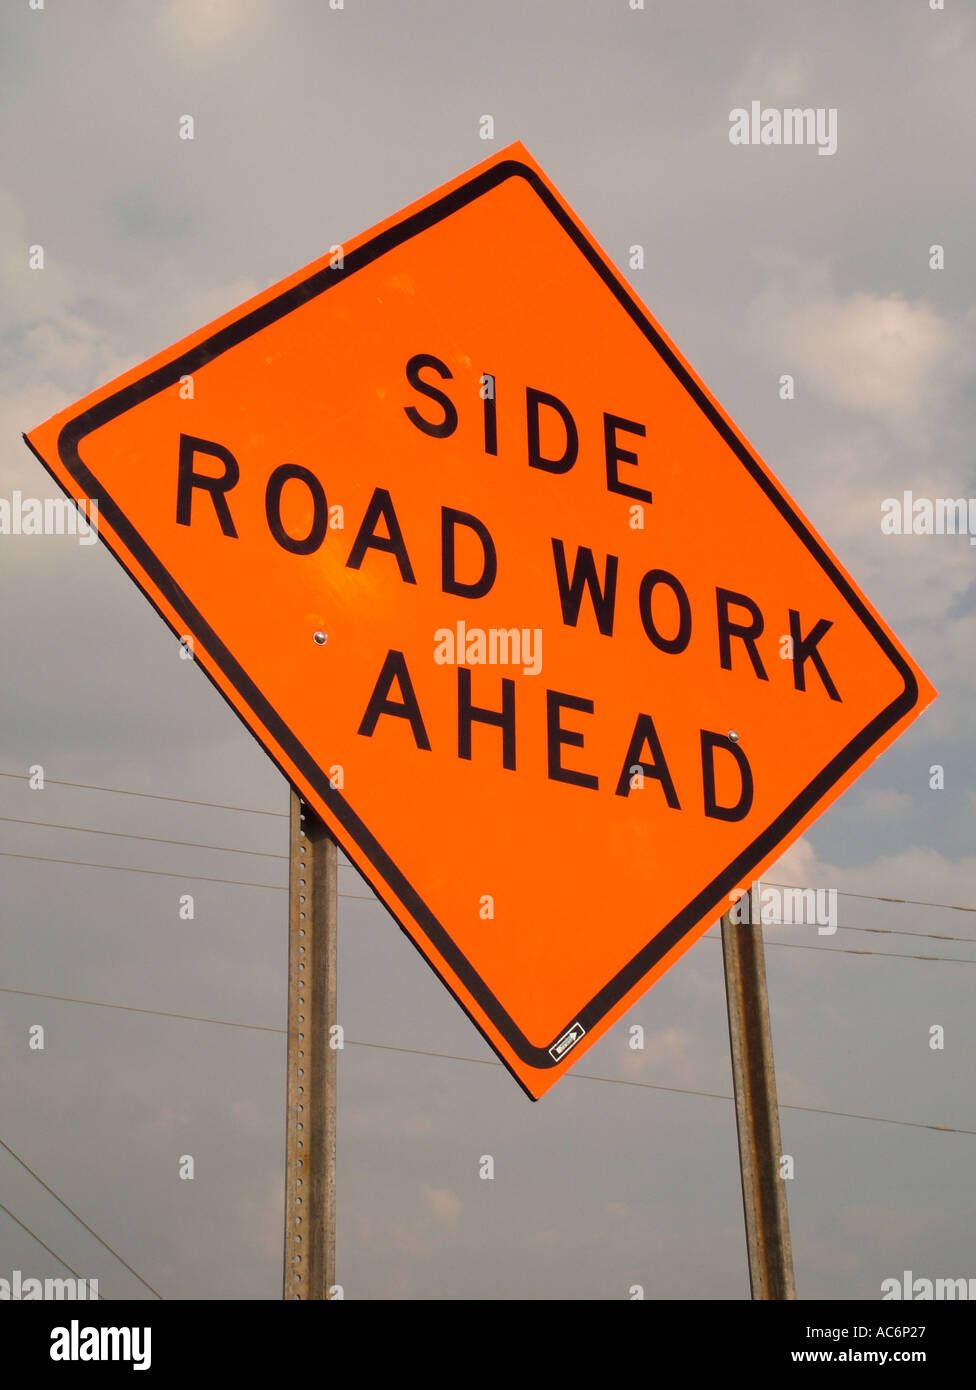 AJD42864, road sign, Side Road Work Ahead Stock Photo